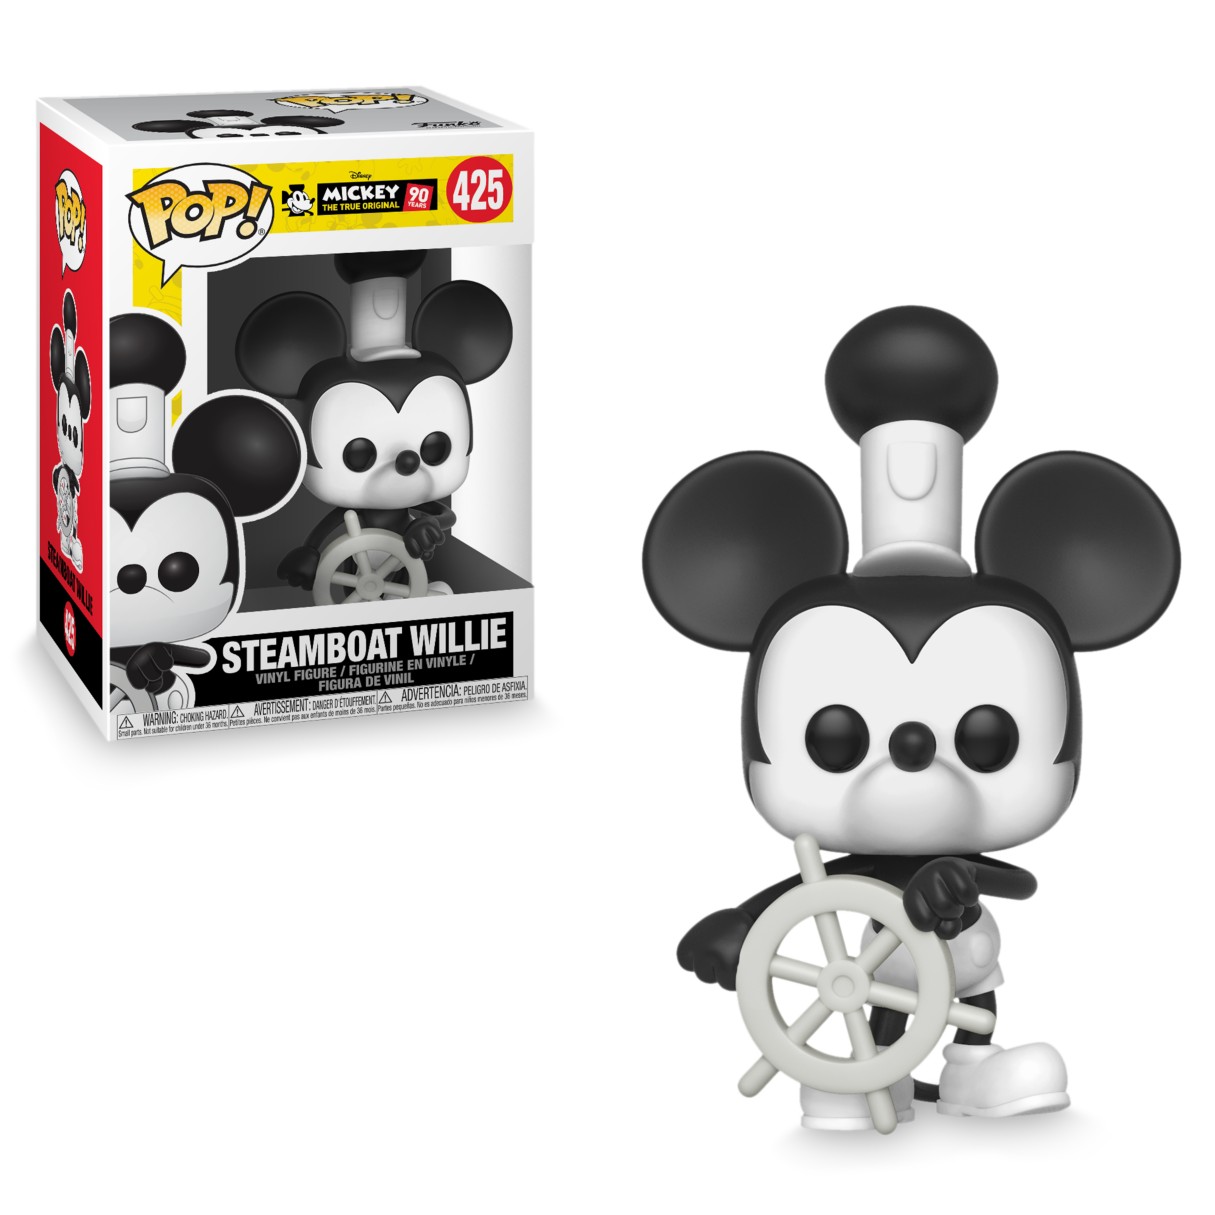 Mickey Mouse 90th Anniversary Pop! Vinyl Figure by Funko – Steamboat Willie